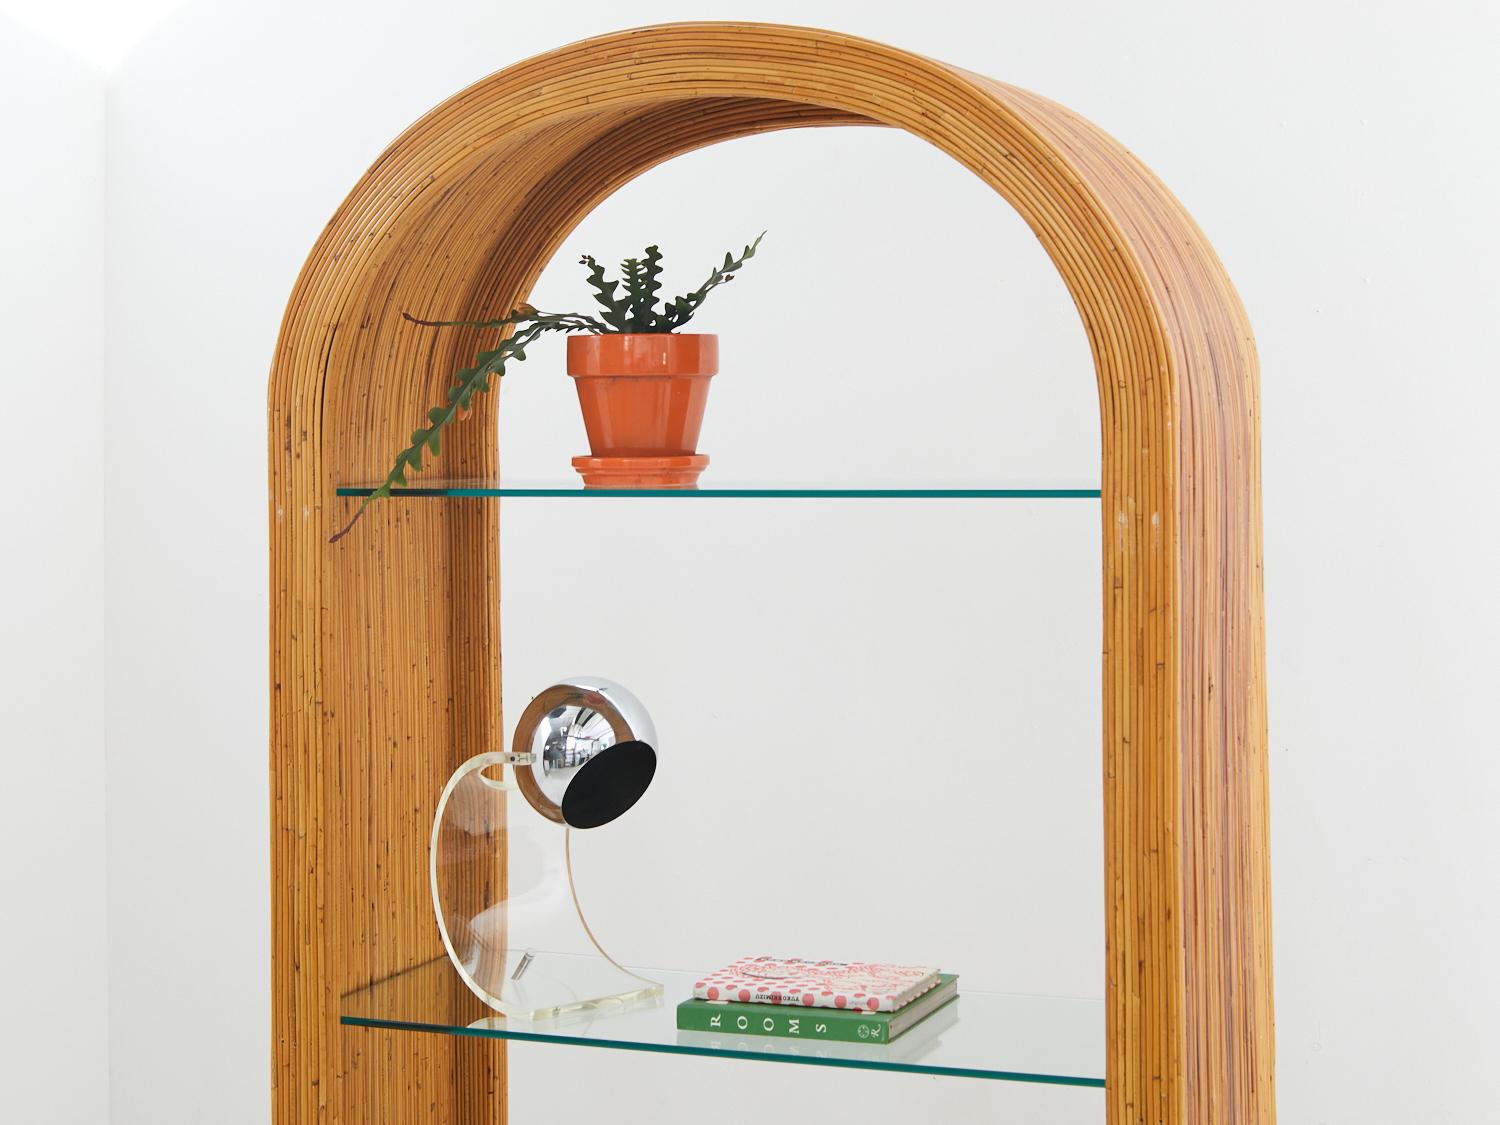 Say hello to the 1970s pencil reed etagere—a stylish storage solution that adds a touch of boho charm to your space. It's the perfect spot to showcase your favorite books, plants, and maybe even a lava lamp.

- 75